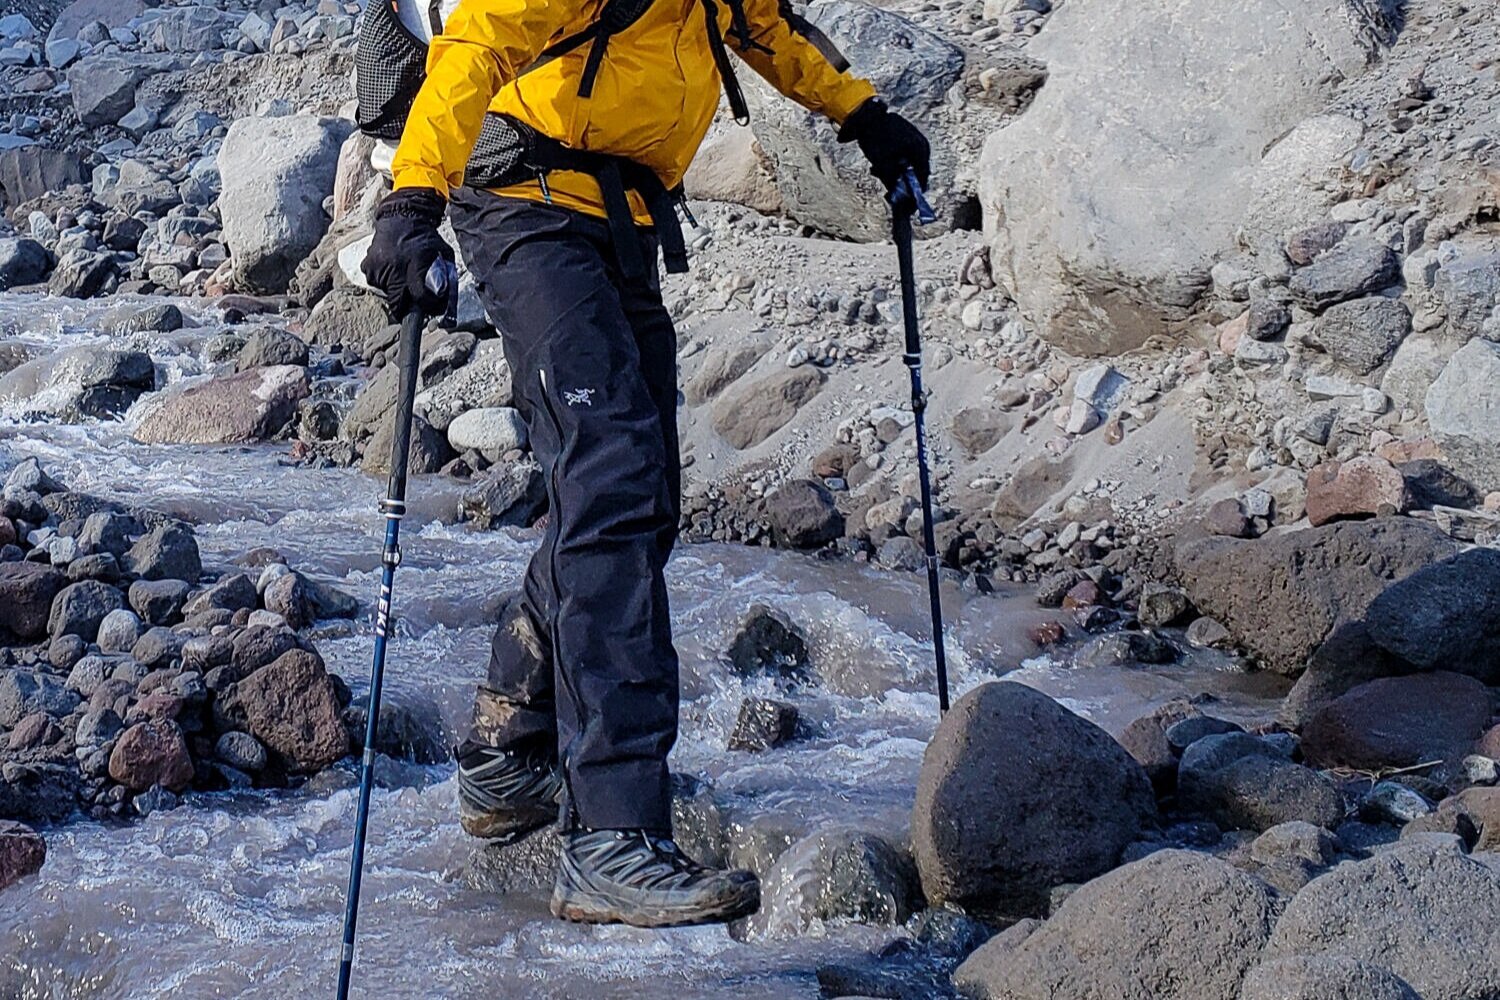 The Arc’teryx Zeta SL Pants are high-qualtiy and lightweight for backcountry adventures.